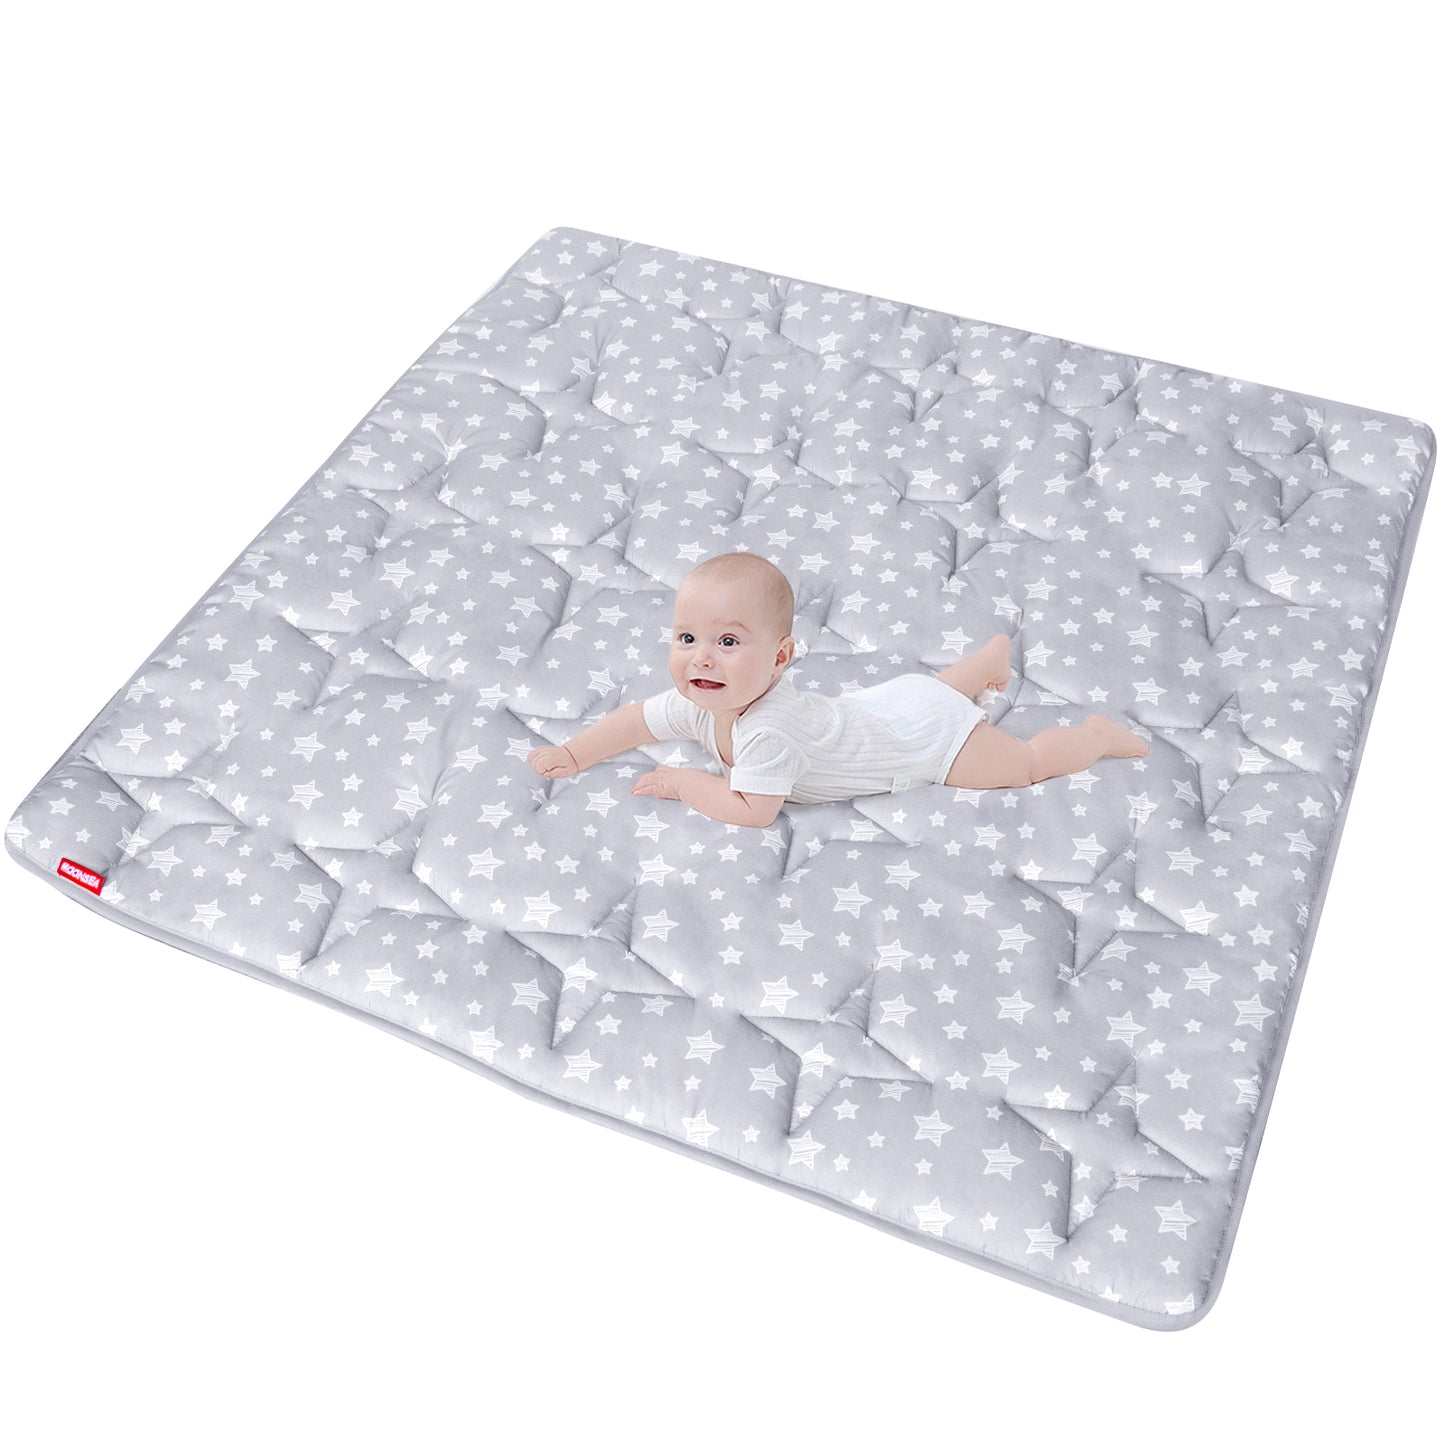 Baby Play Mat | Playpen Mat - 59" x 59", Large Padded Tummy Time Activity Mat for Infant & Toddler, Grey Star - Moonsea Bedding